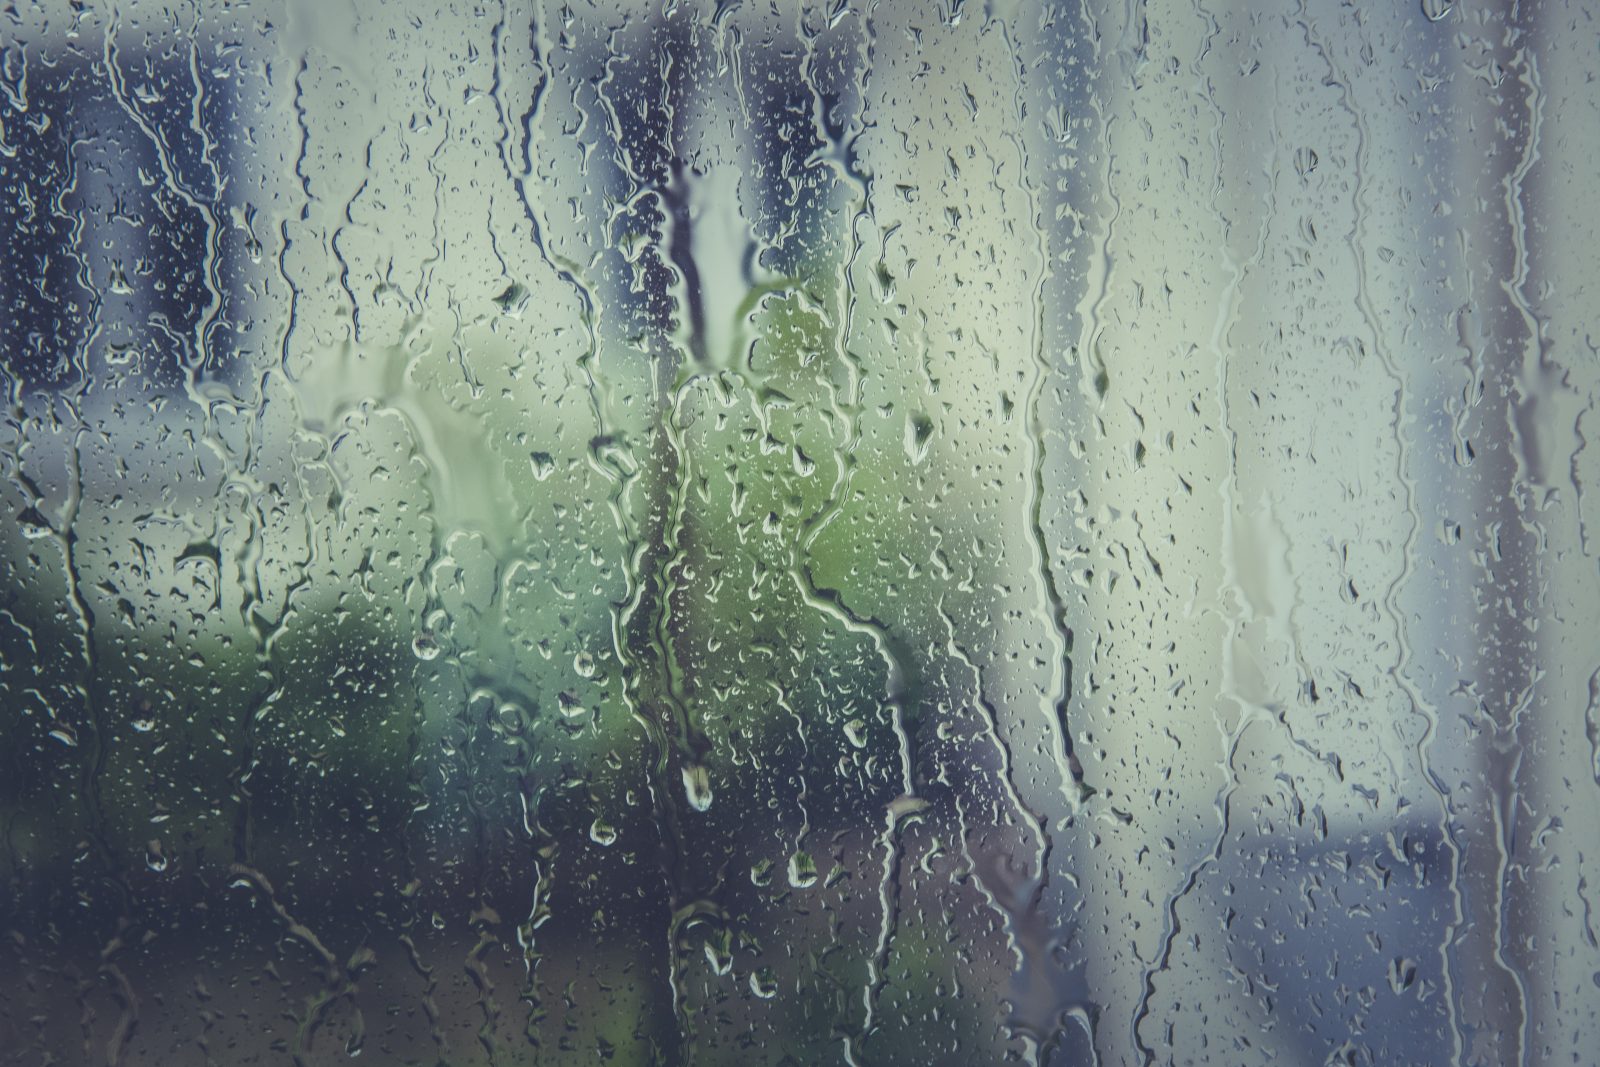 Rainfall warning issued for Cornwall area April 6